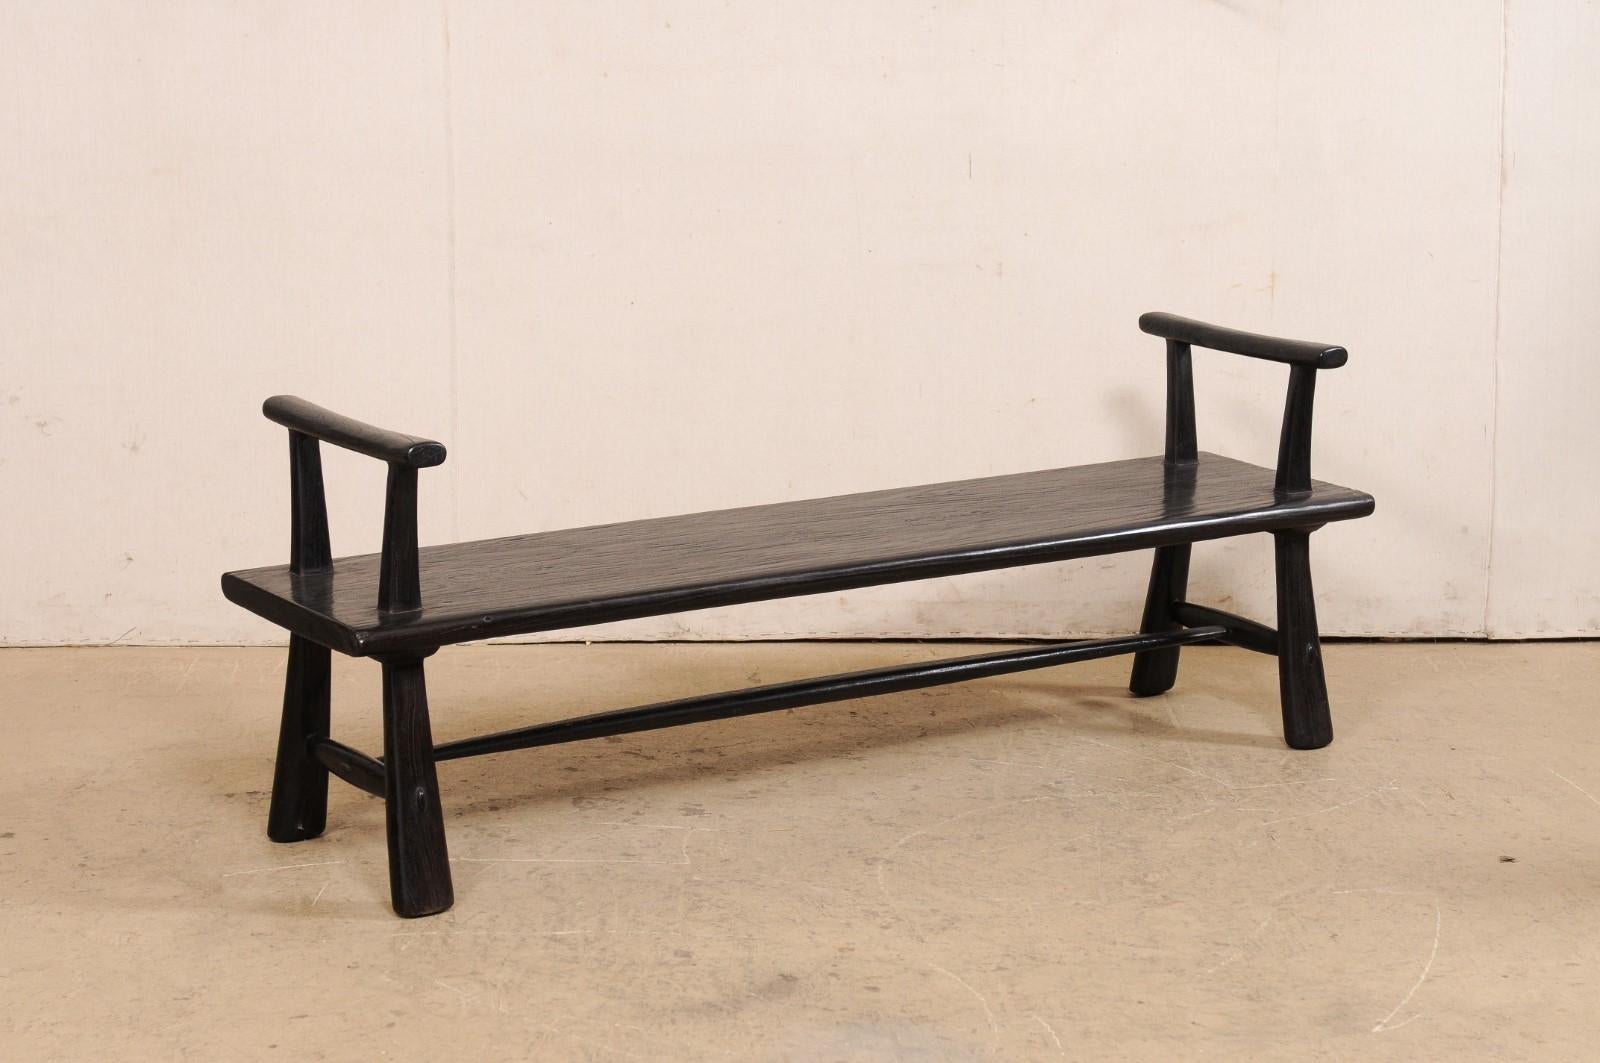 A sleek, artisan-made ebonized bench of teak wood. This hand-crafted wood bench from Indonesia has a rectangular-shaped seat, extending approximately 5.75 feet in length, flanked with raised arms at either far end, which are designed to appear as if